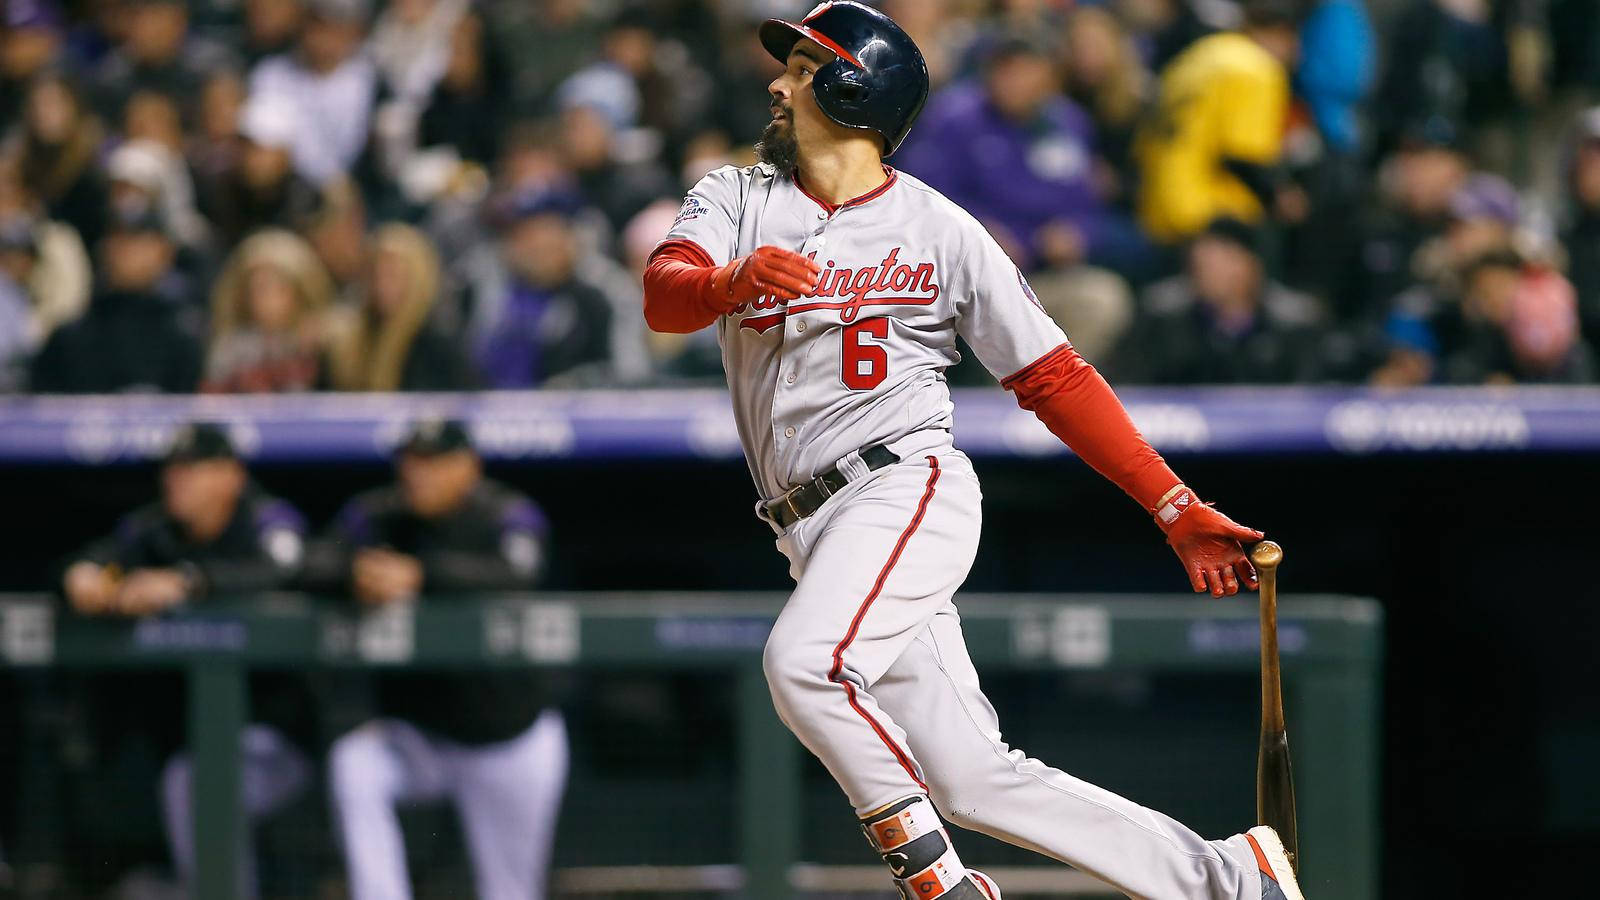 Anthony Rendon Running While Letting Go Of Bat Background